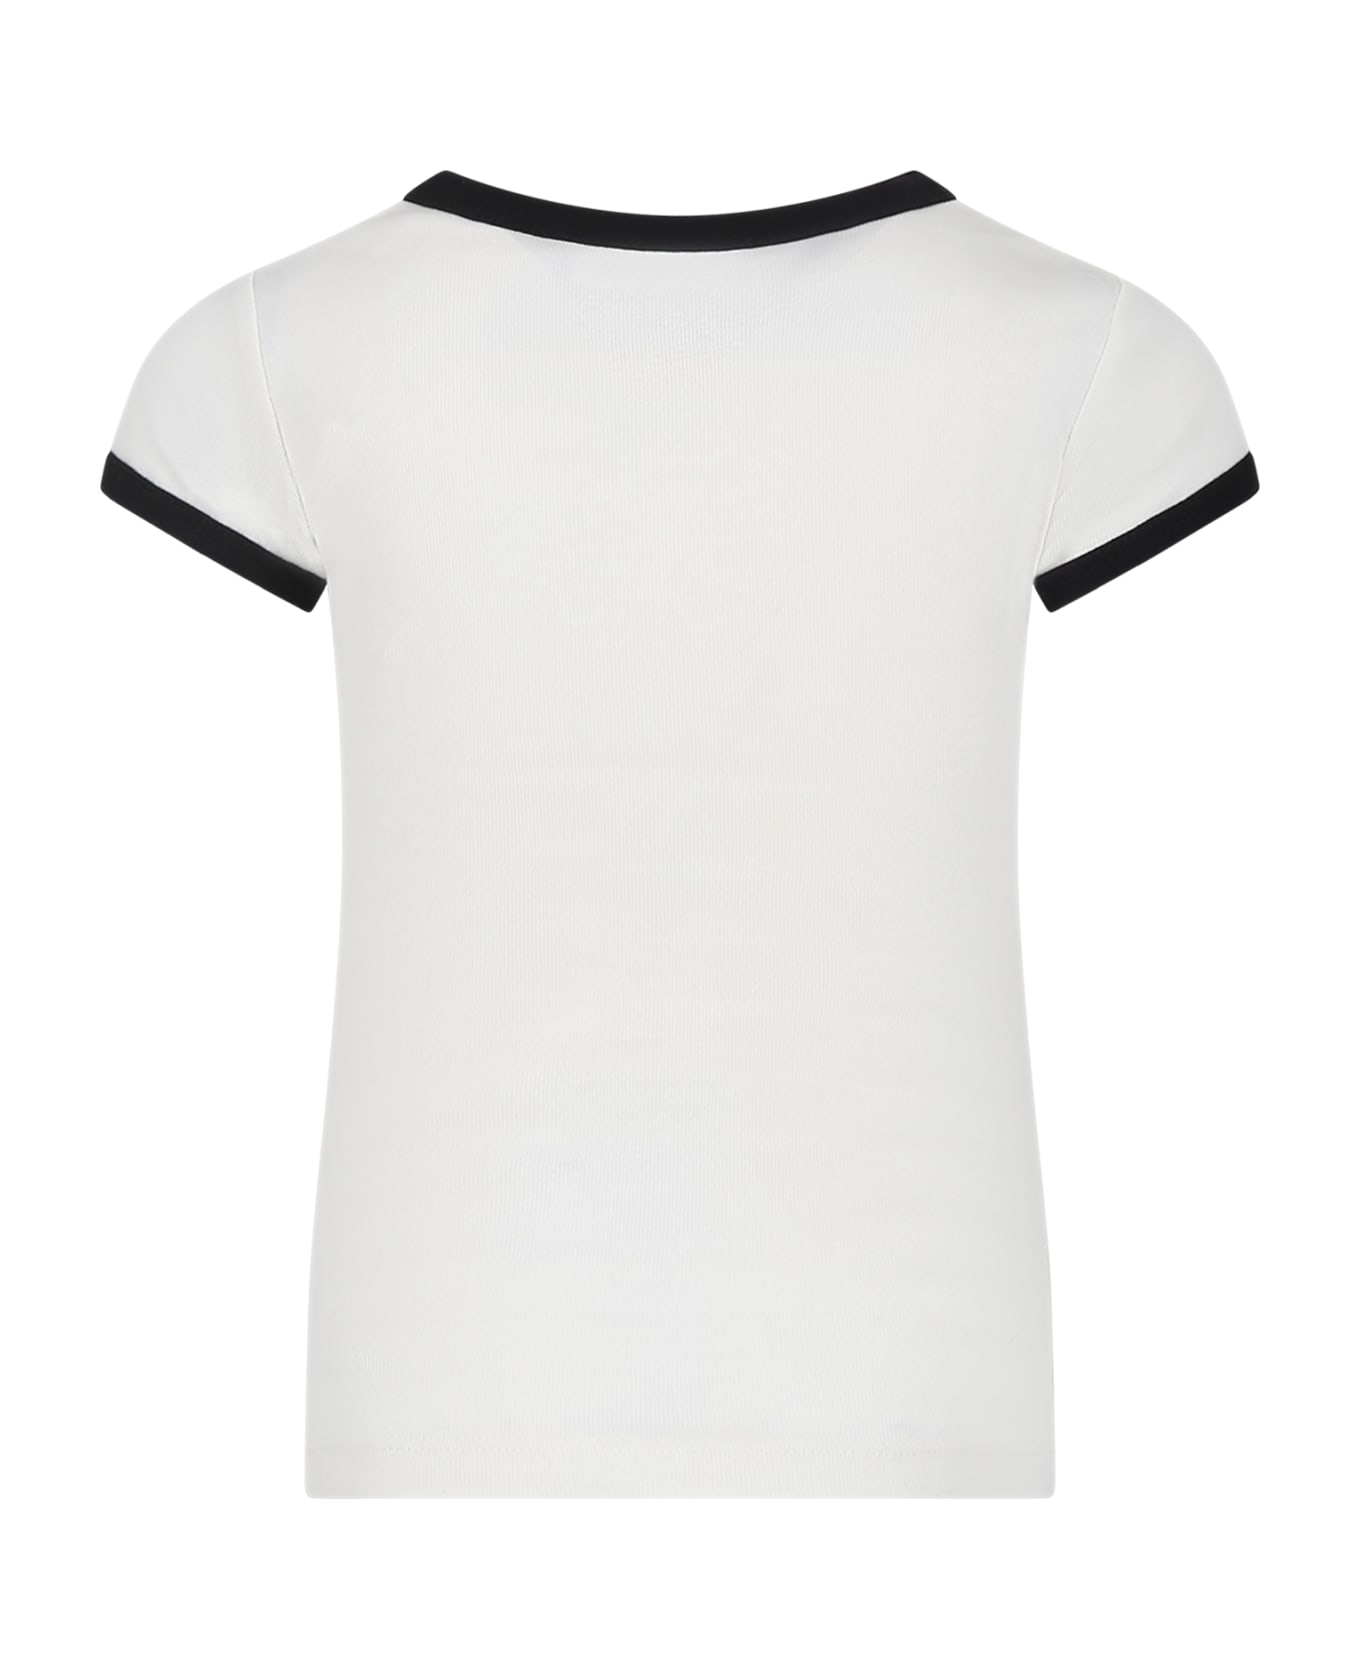 Molo White T-shirt For Girl With Print And Writing - White